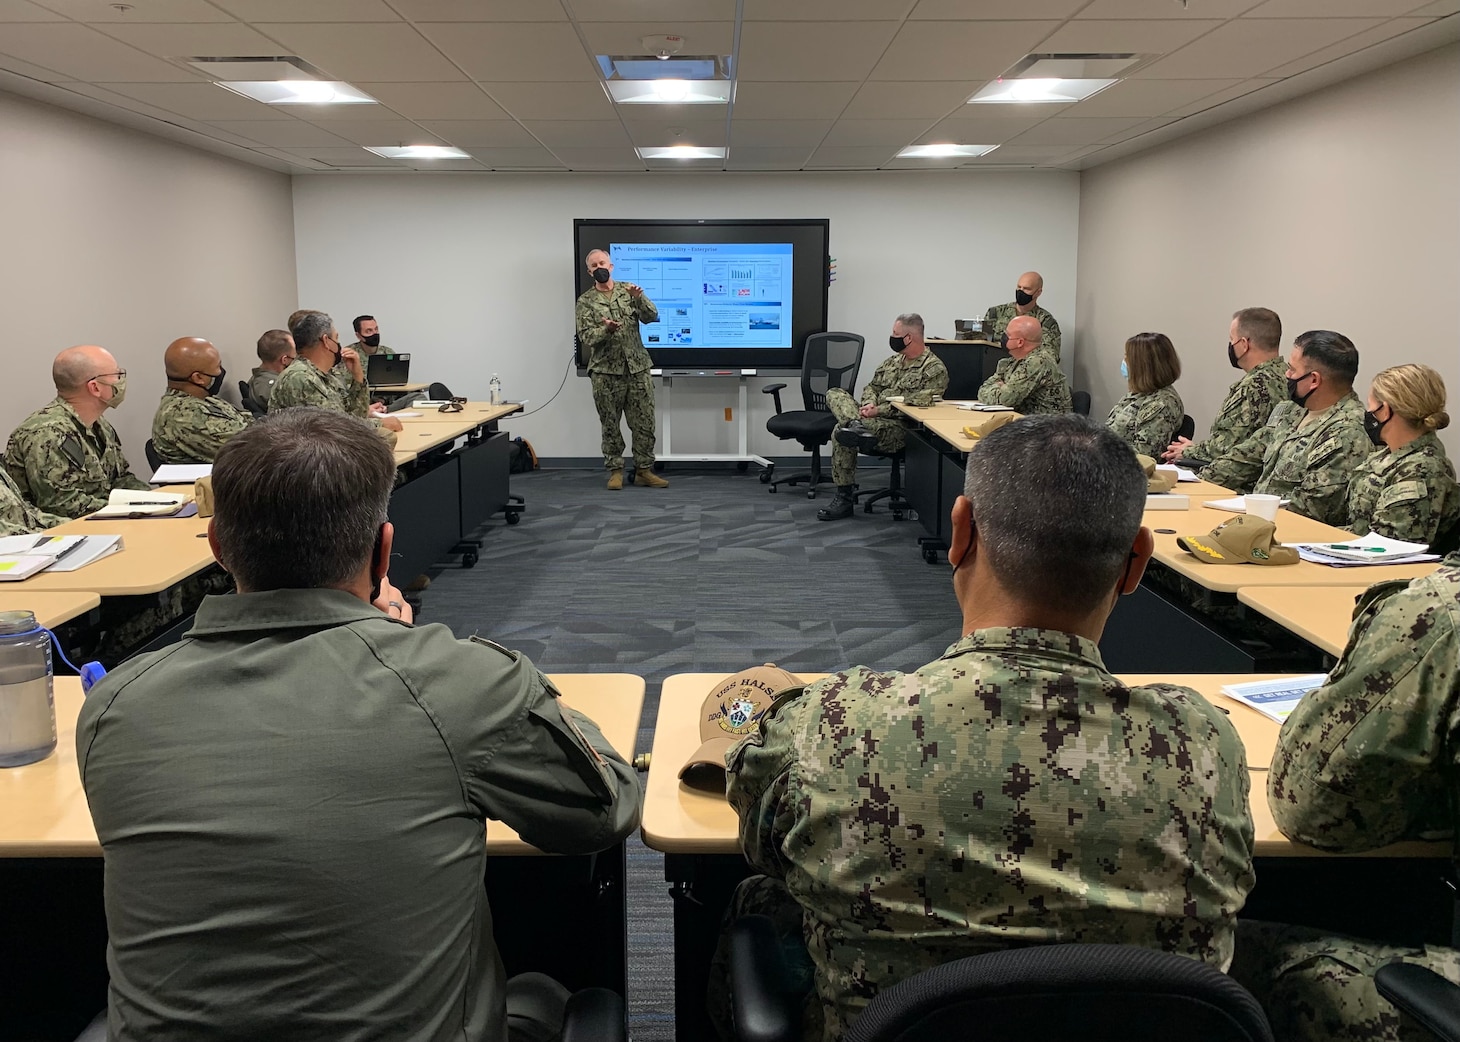 ice Chief of Naval Operations Adm. Bill Lescher speaks with command triads from across the San Diego area about Get Real, Get Better principles.